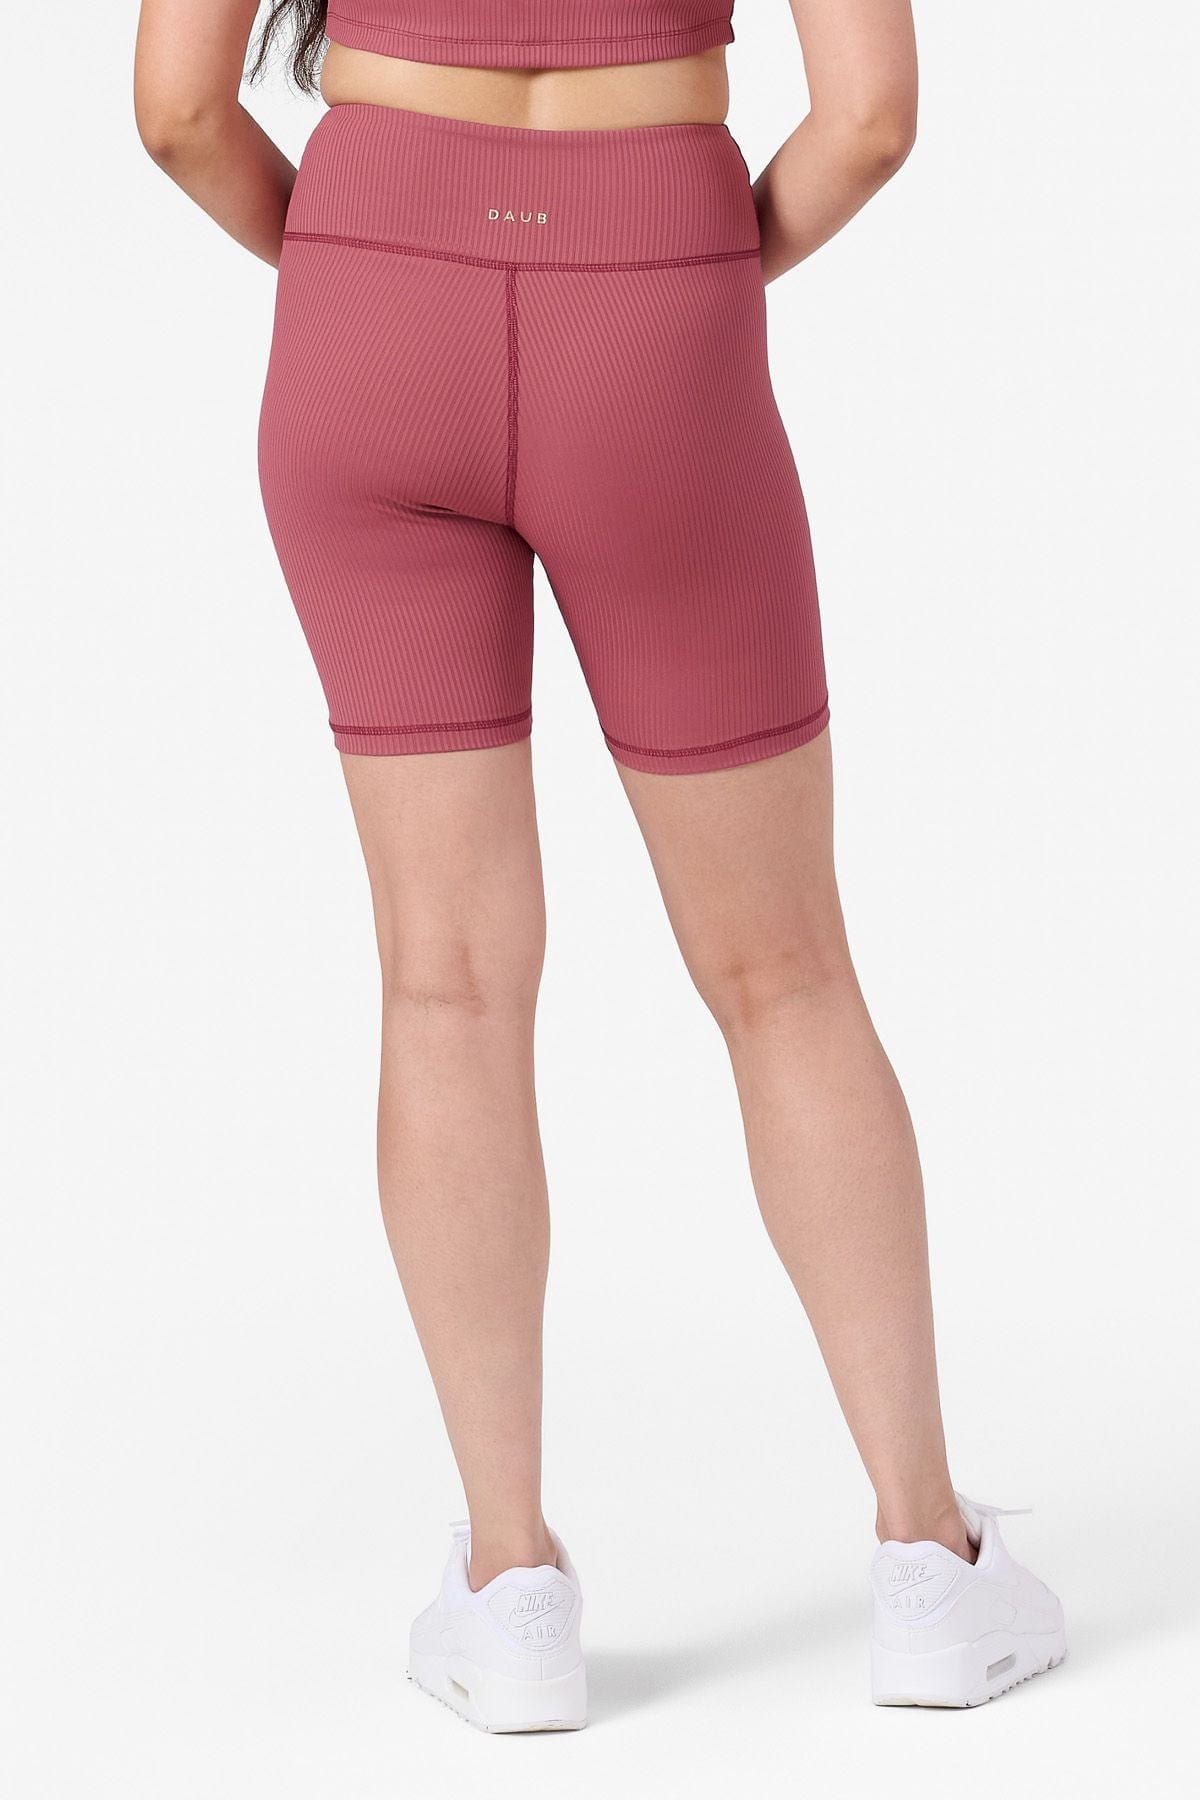 half view of a woman wearing pink ribbed bike shorts from the back